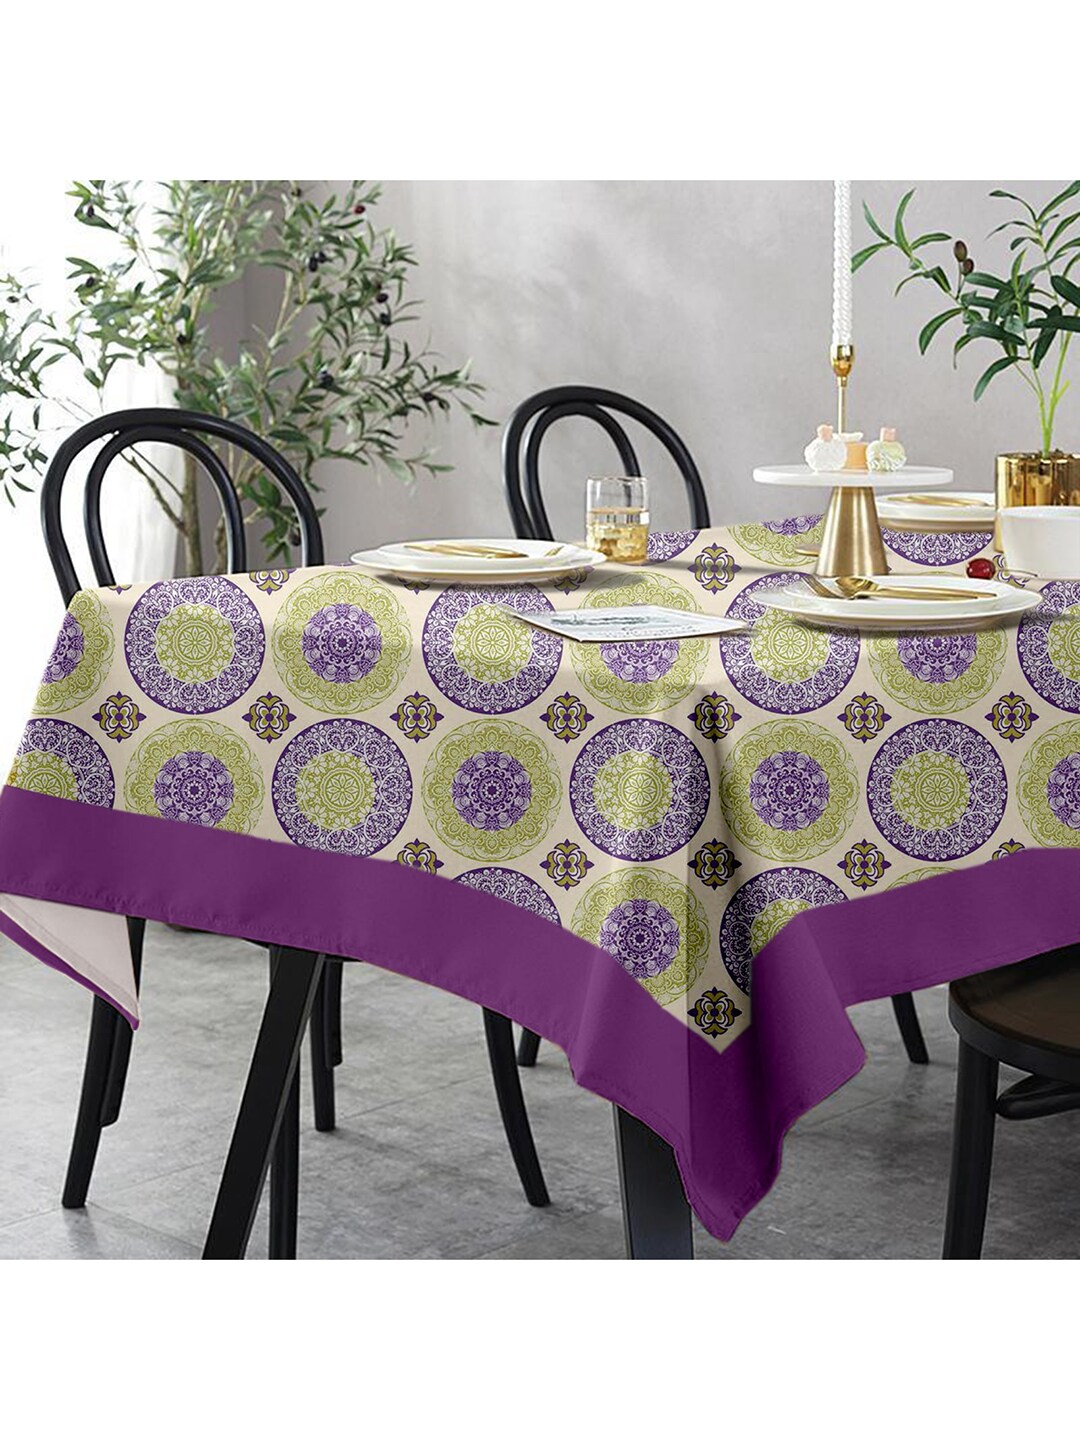 Lushomes Multicoloured Printed 6 Seater Table Cloth Price in India